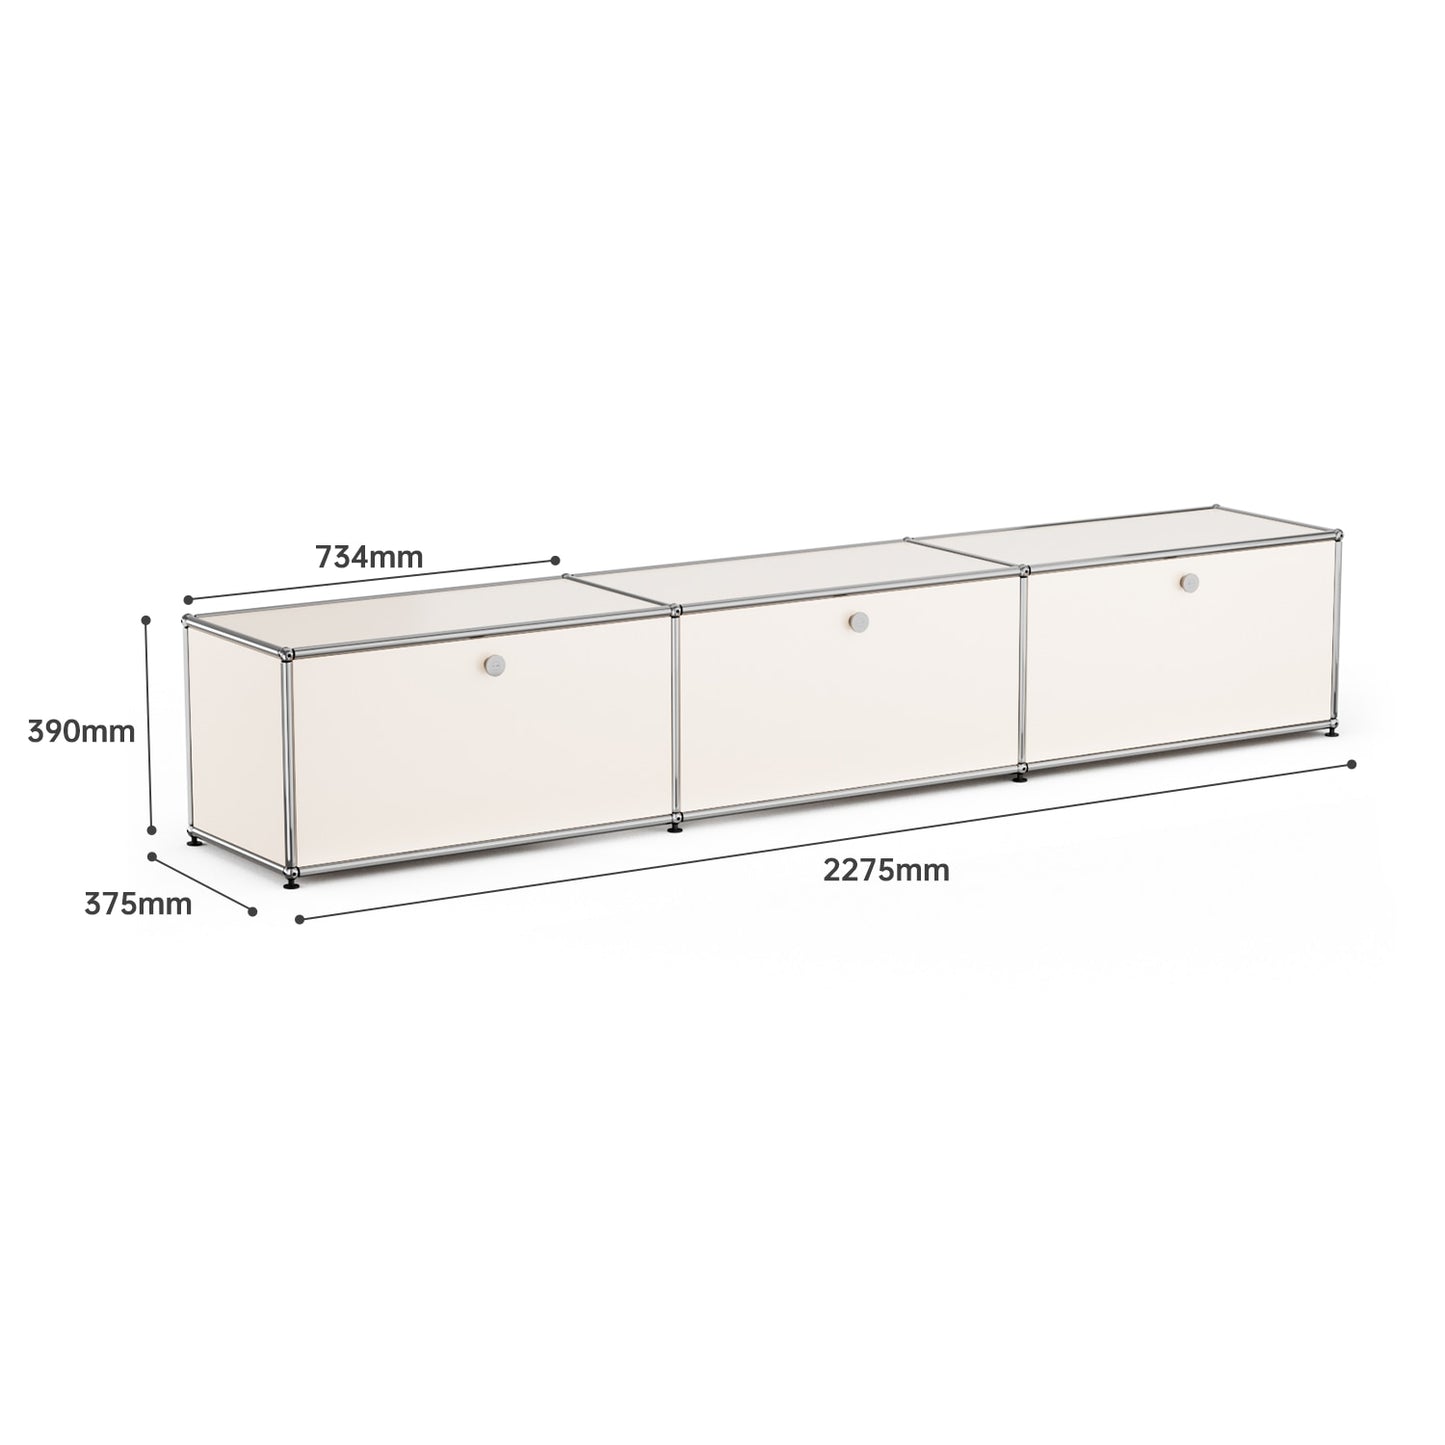 Stainless Steel Modular Storage Cabinet With 2/3/6 Haller Shelf Sideboard, Customized Size, Night Stand   Use everywhere more covered storage space is desirable.